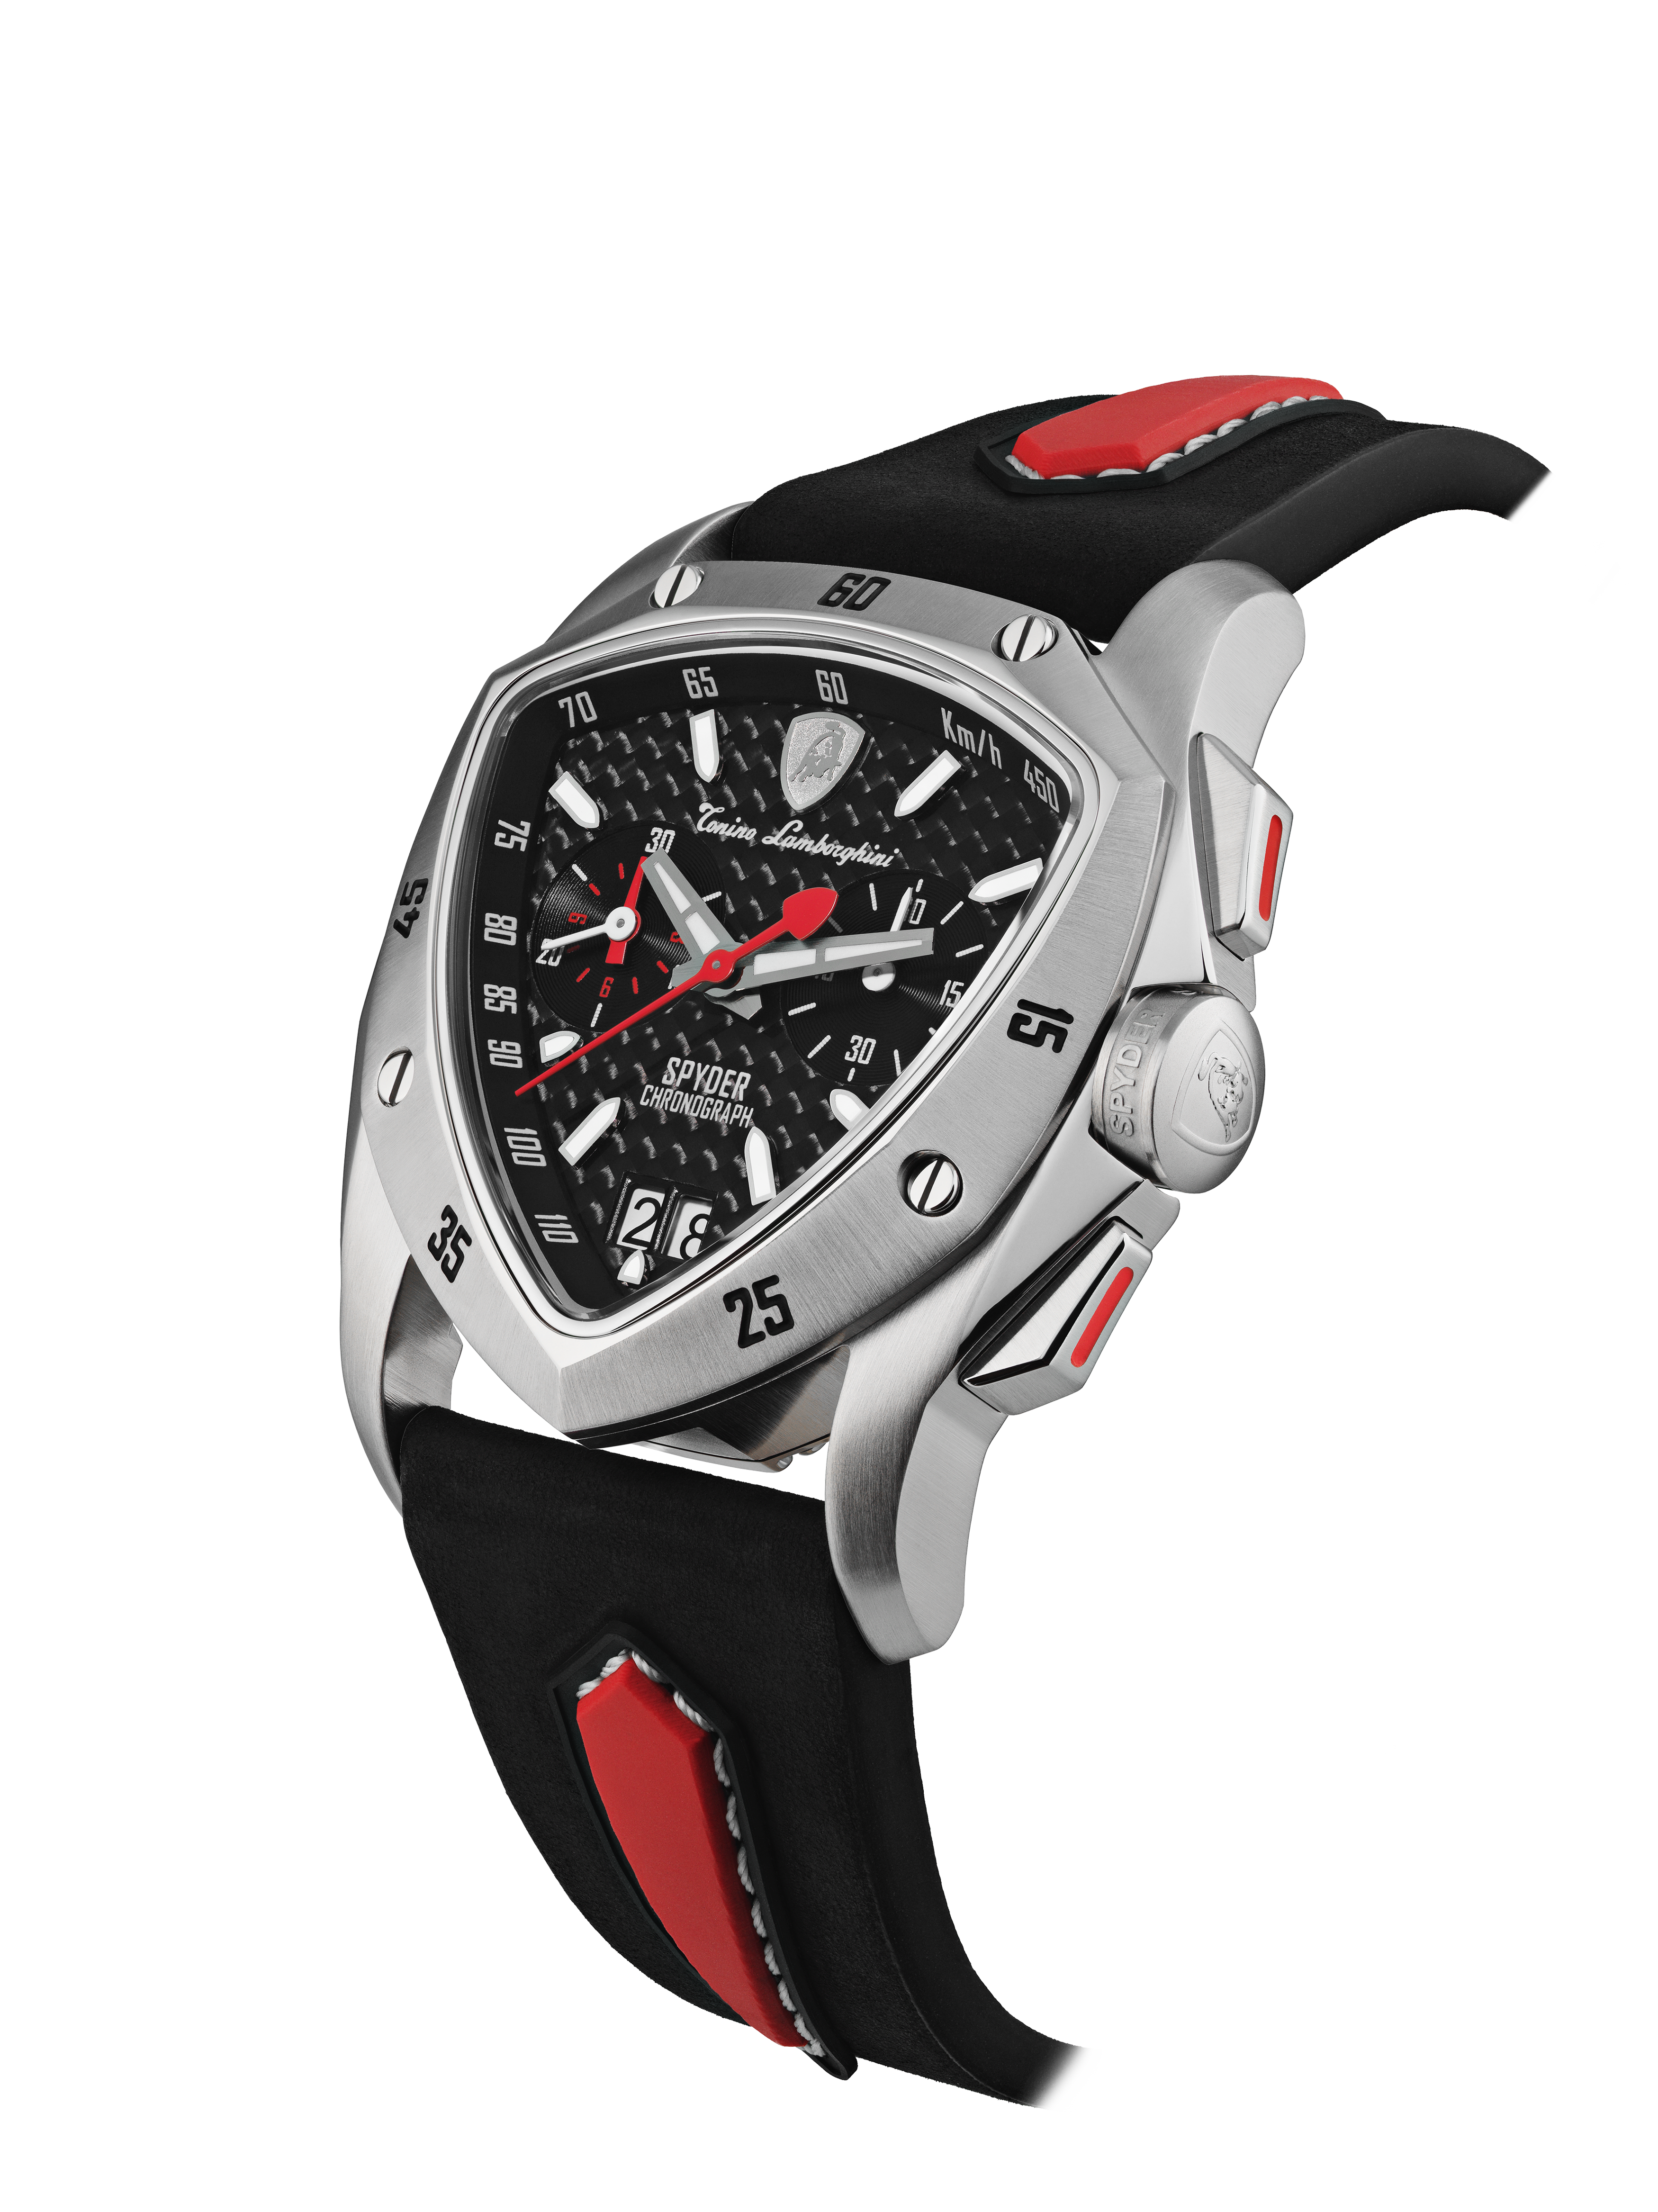 New Spyder Chronograph Silver / Red